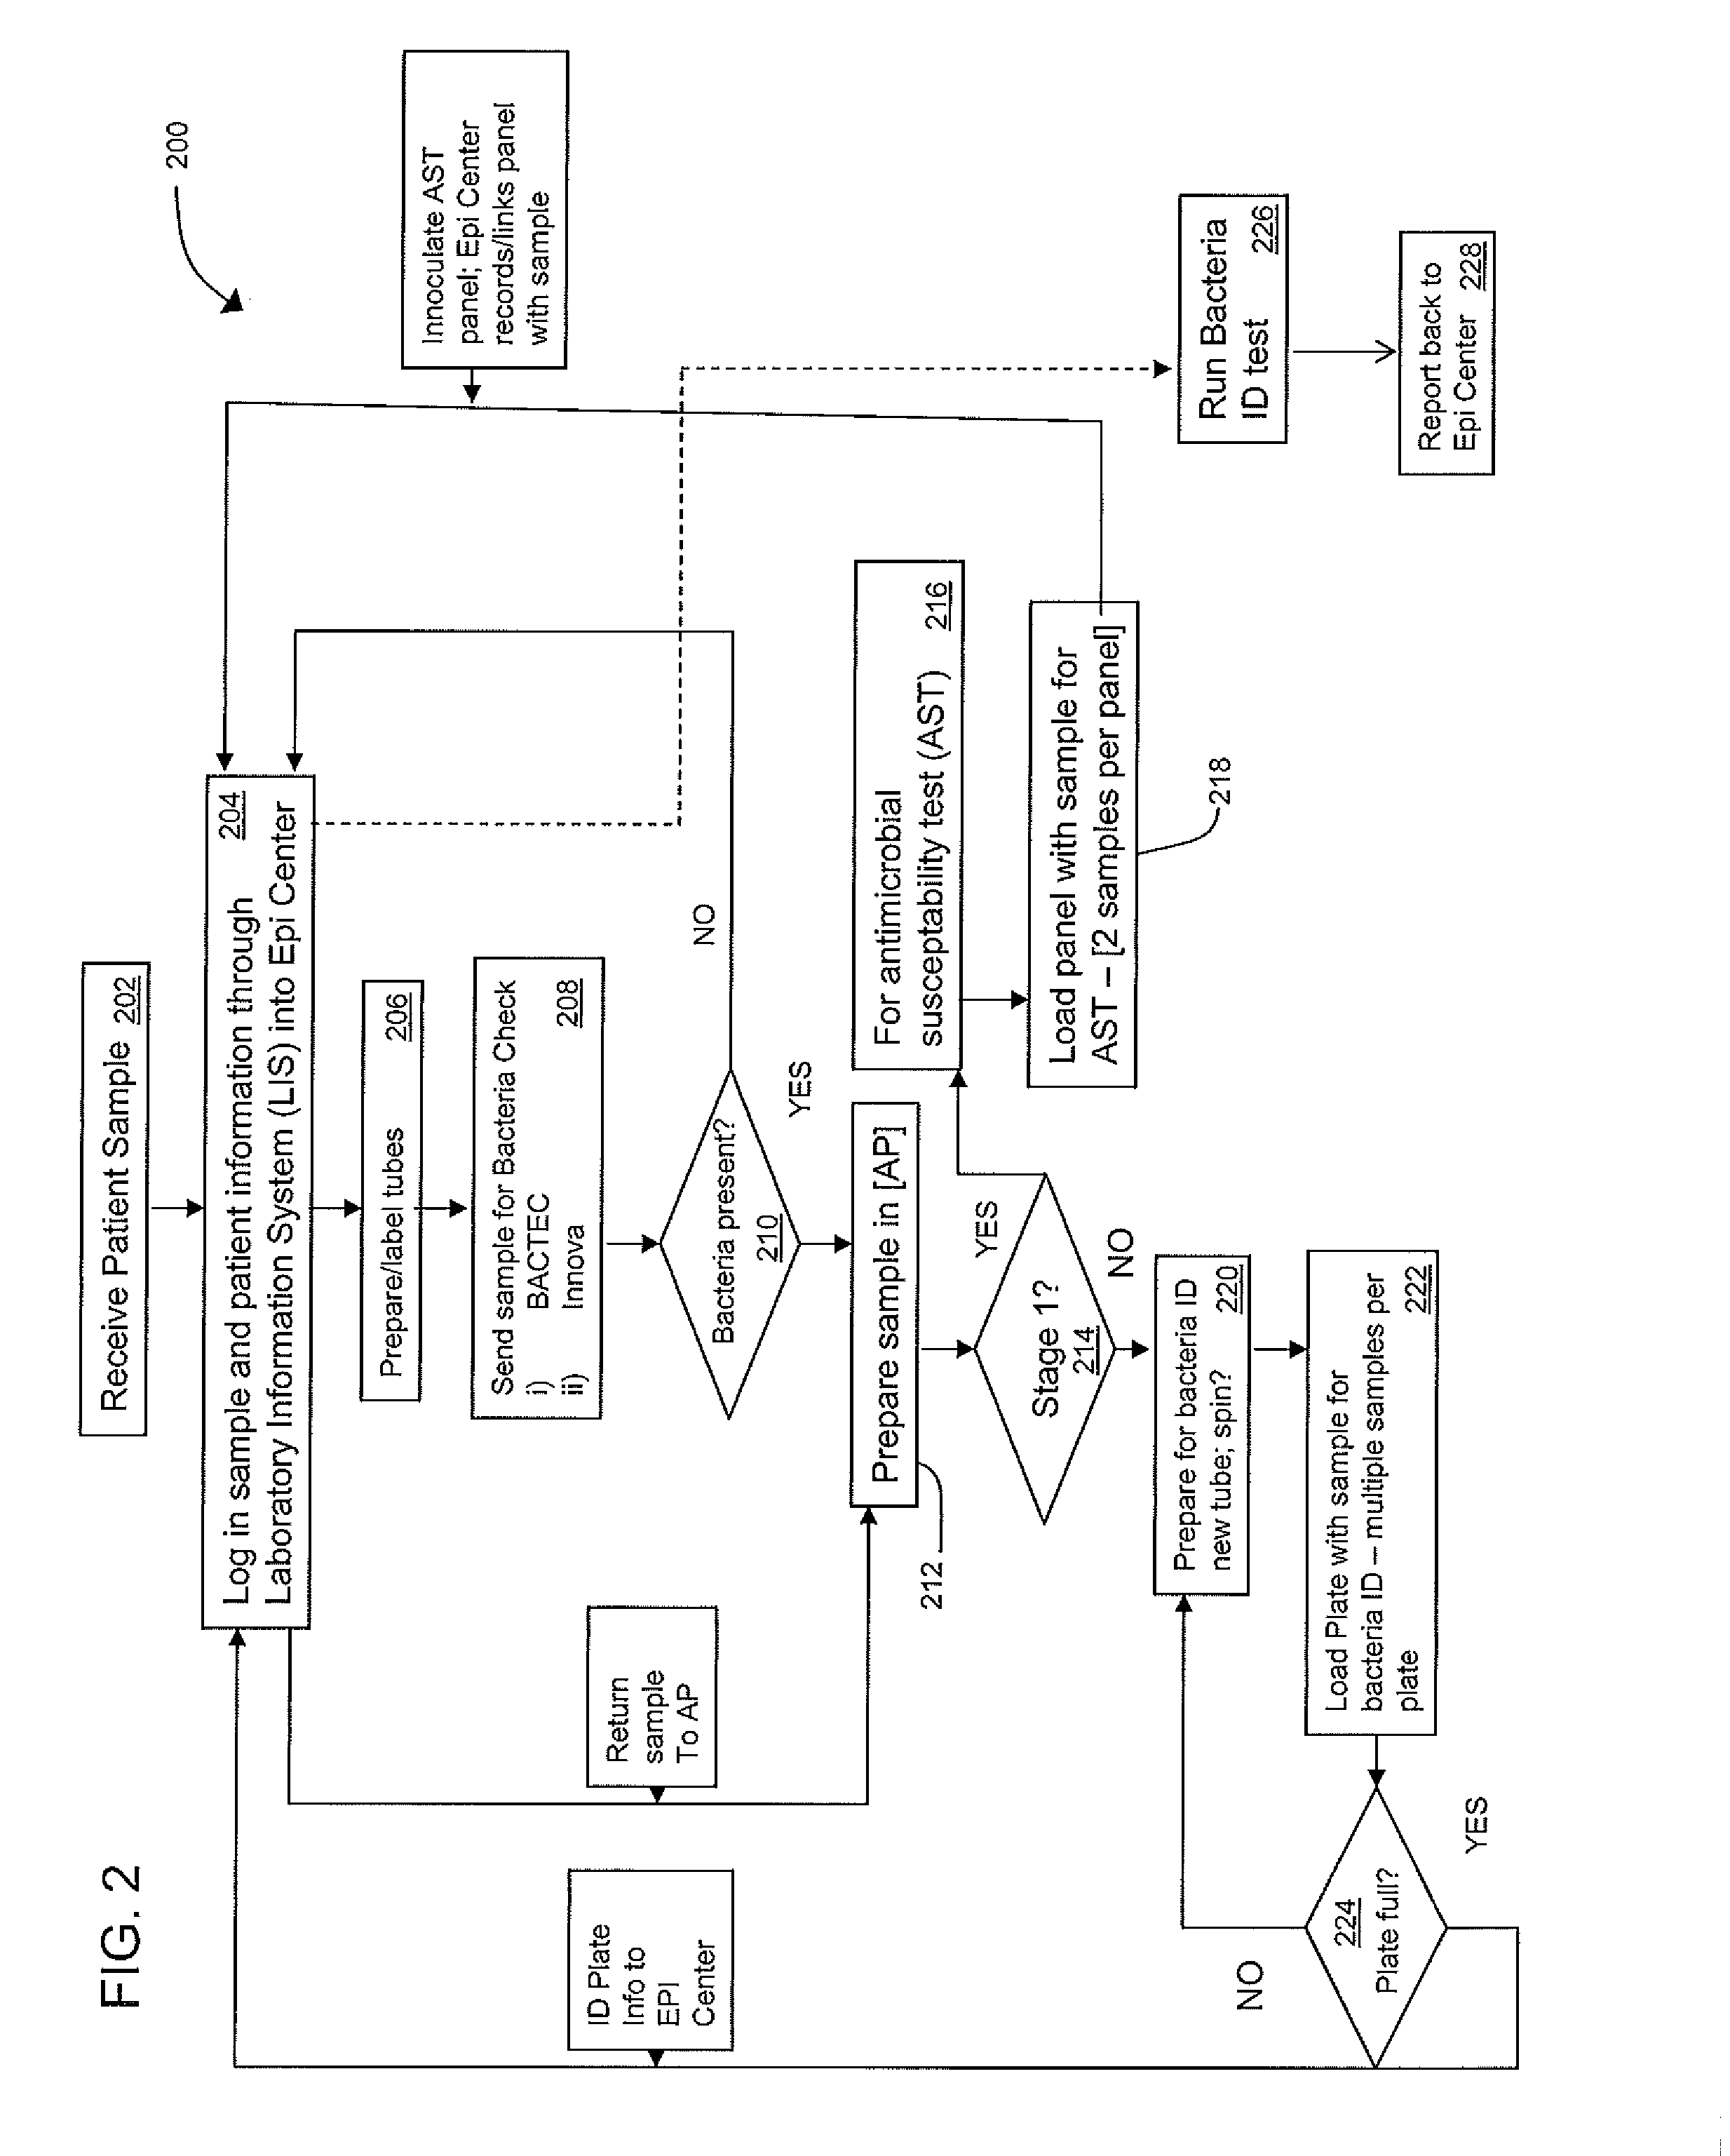 Method and apparatus for identification of bacteria